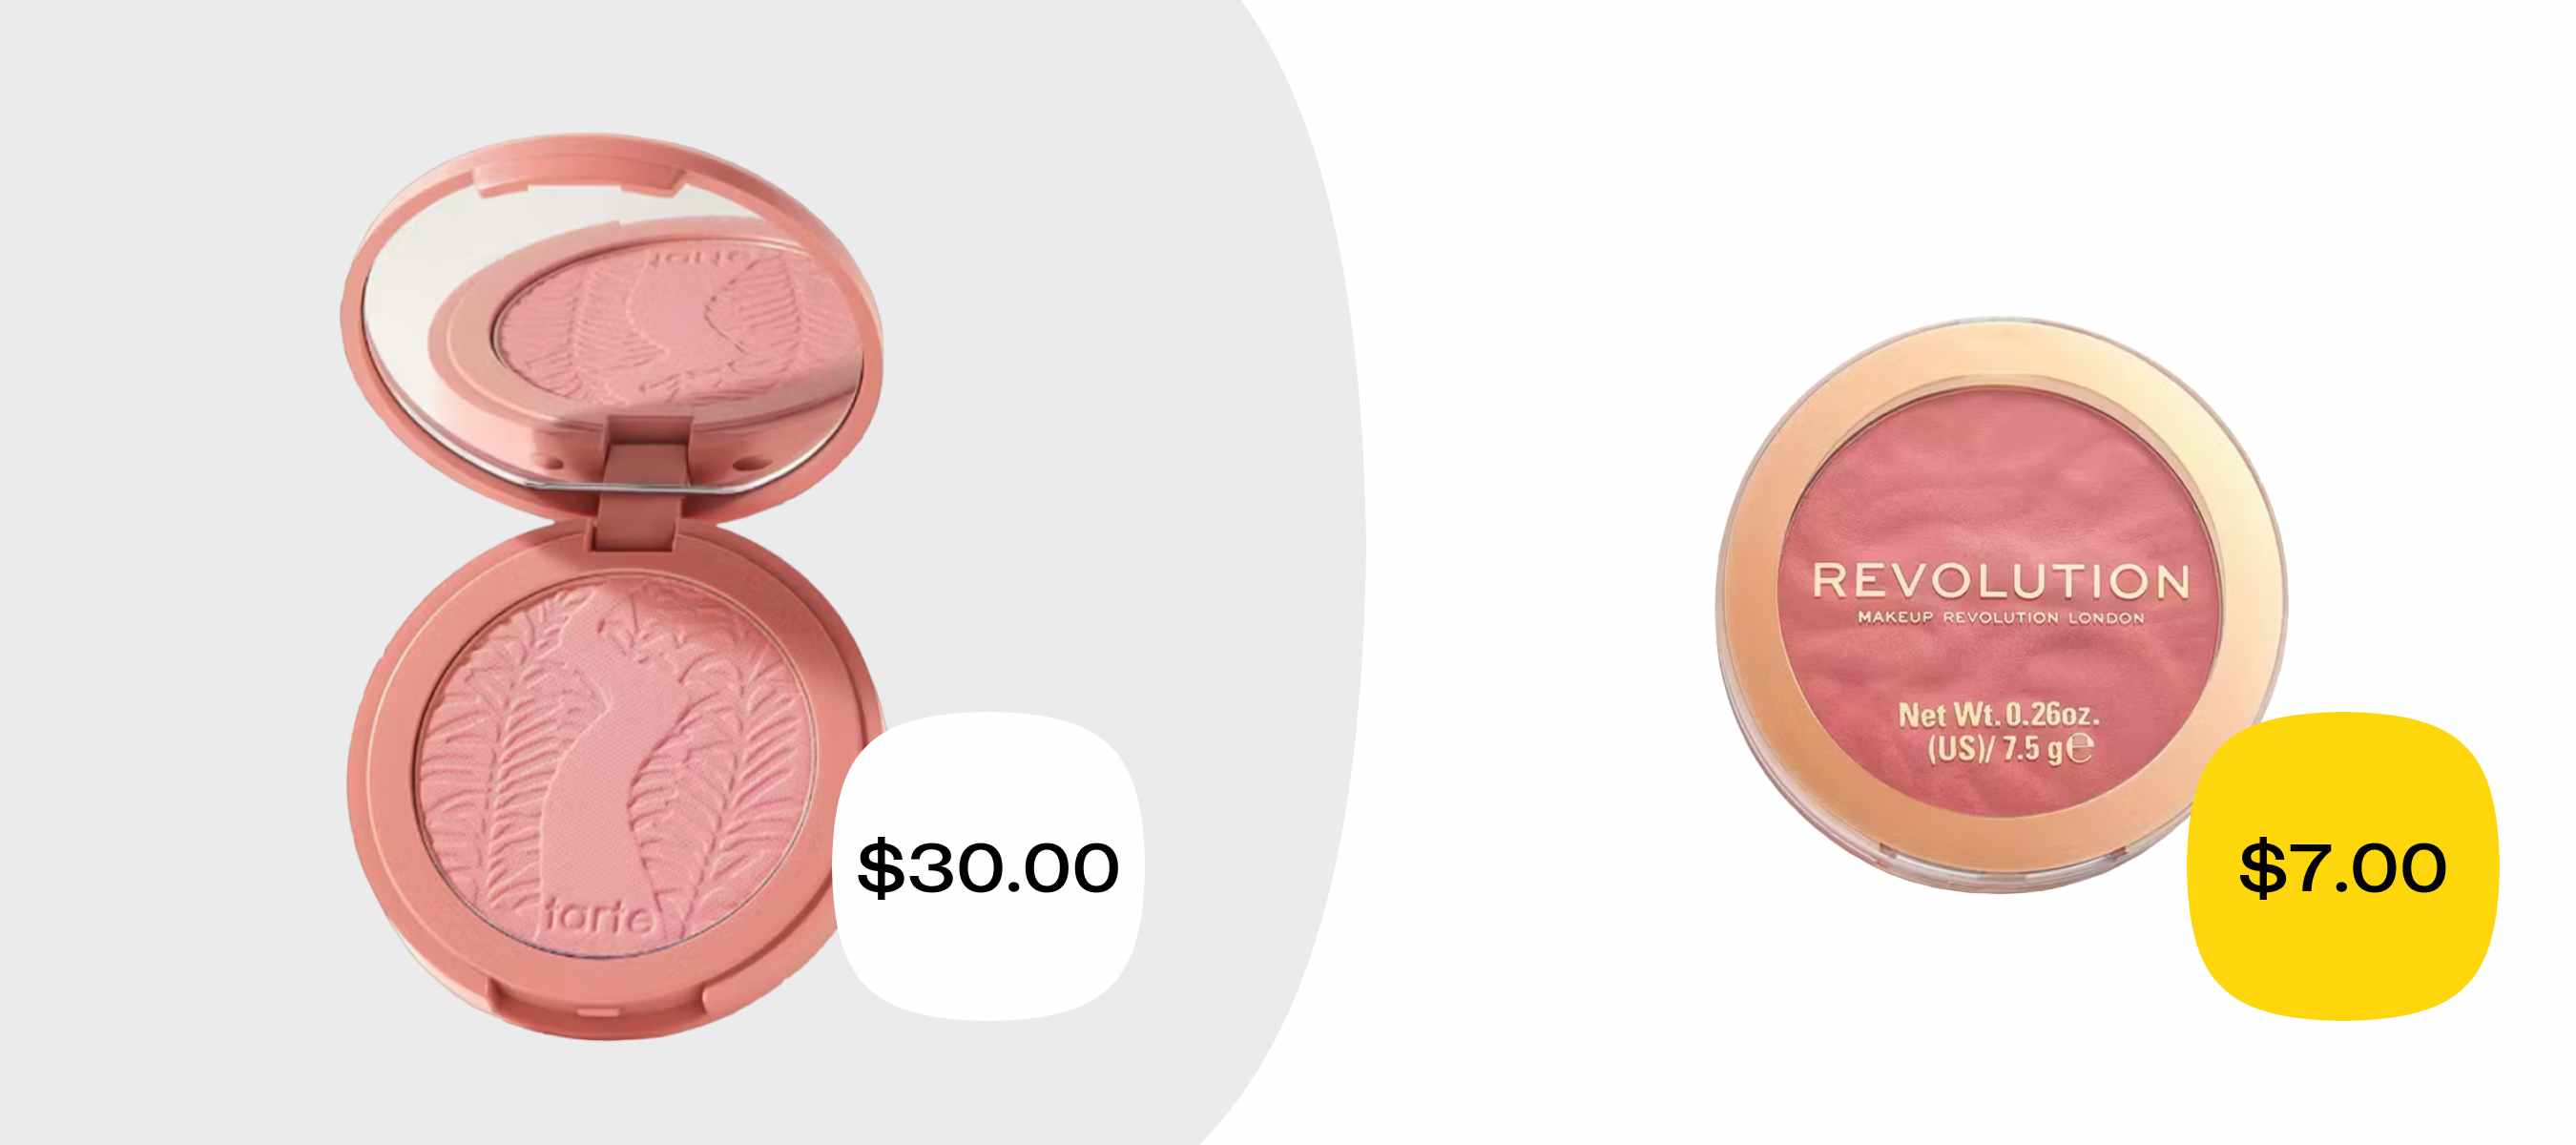 tarte amazonian clay 12-hour blush and makeup revolution blusher reloaded price comparison